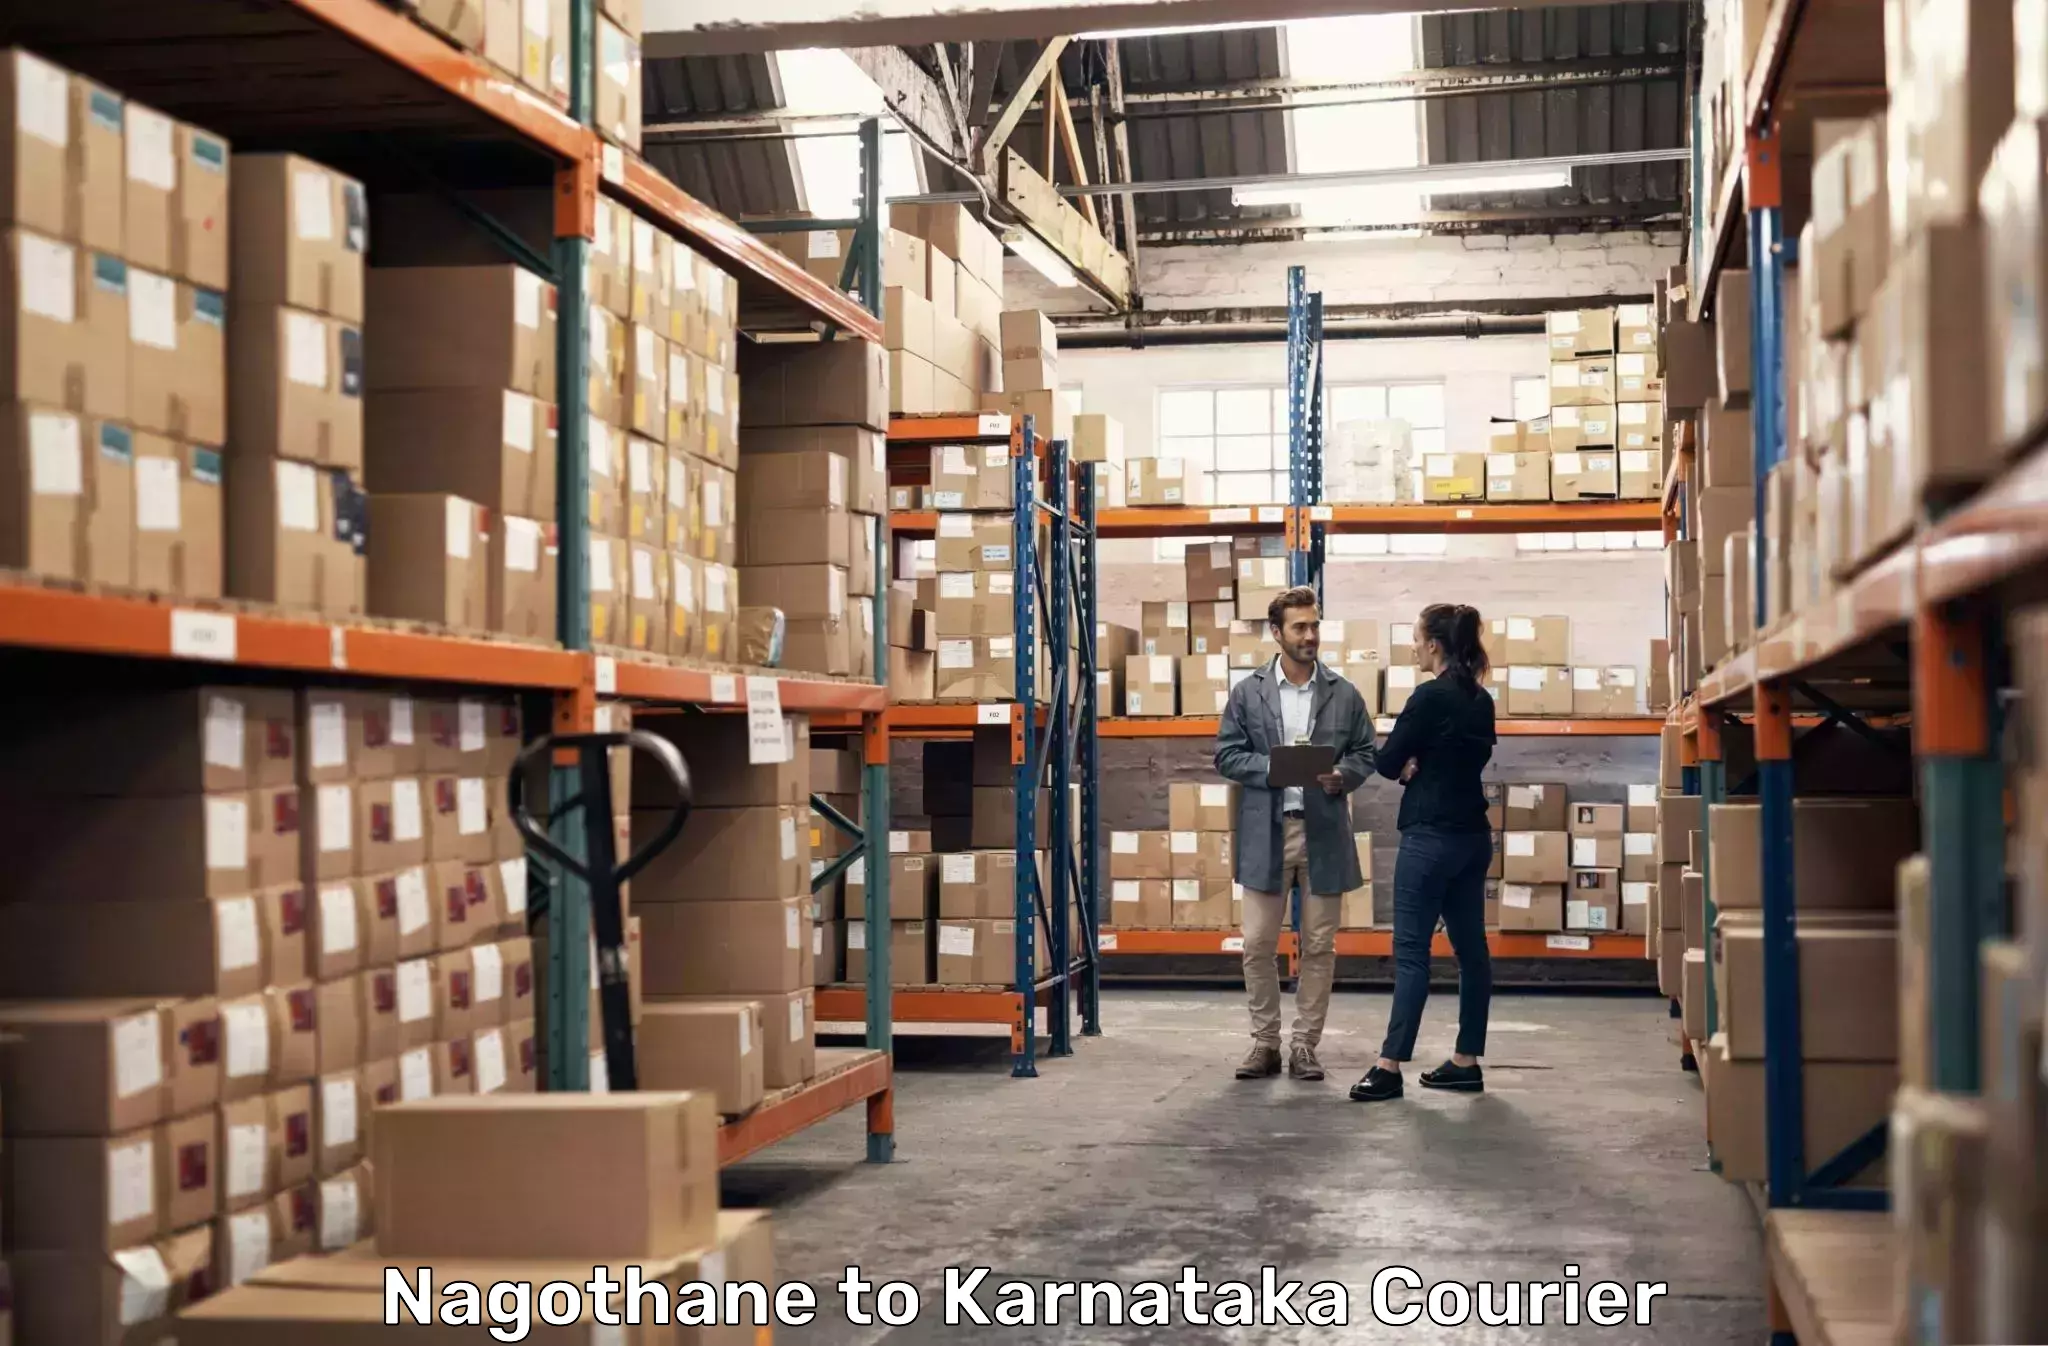 Professional courier handling Nagothane to Chittapur